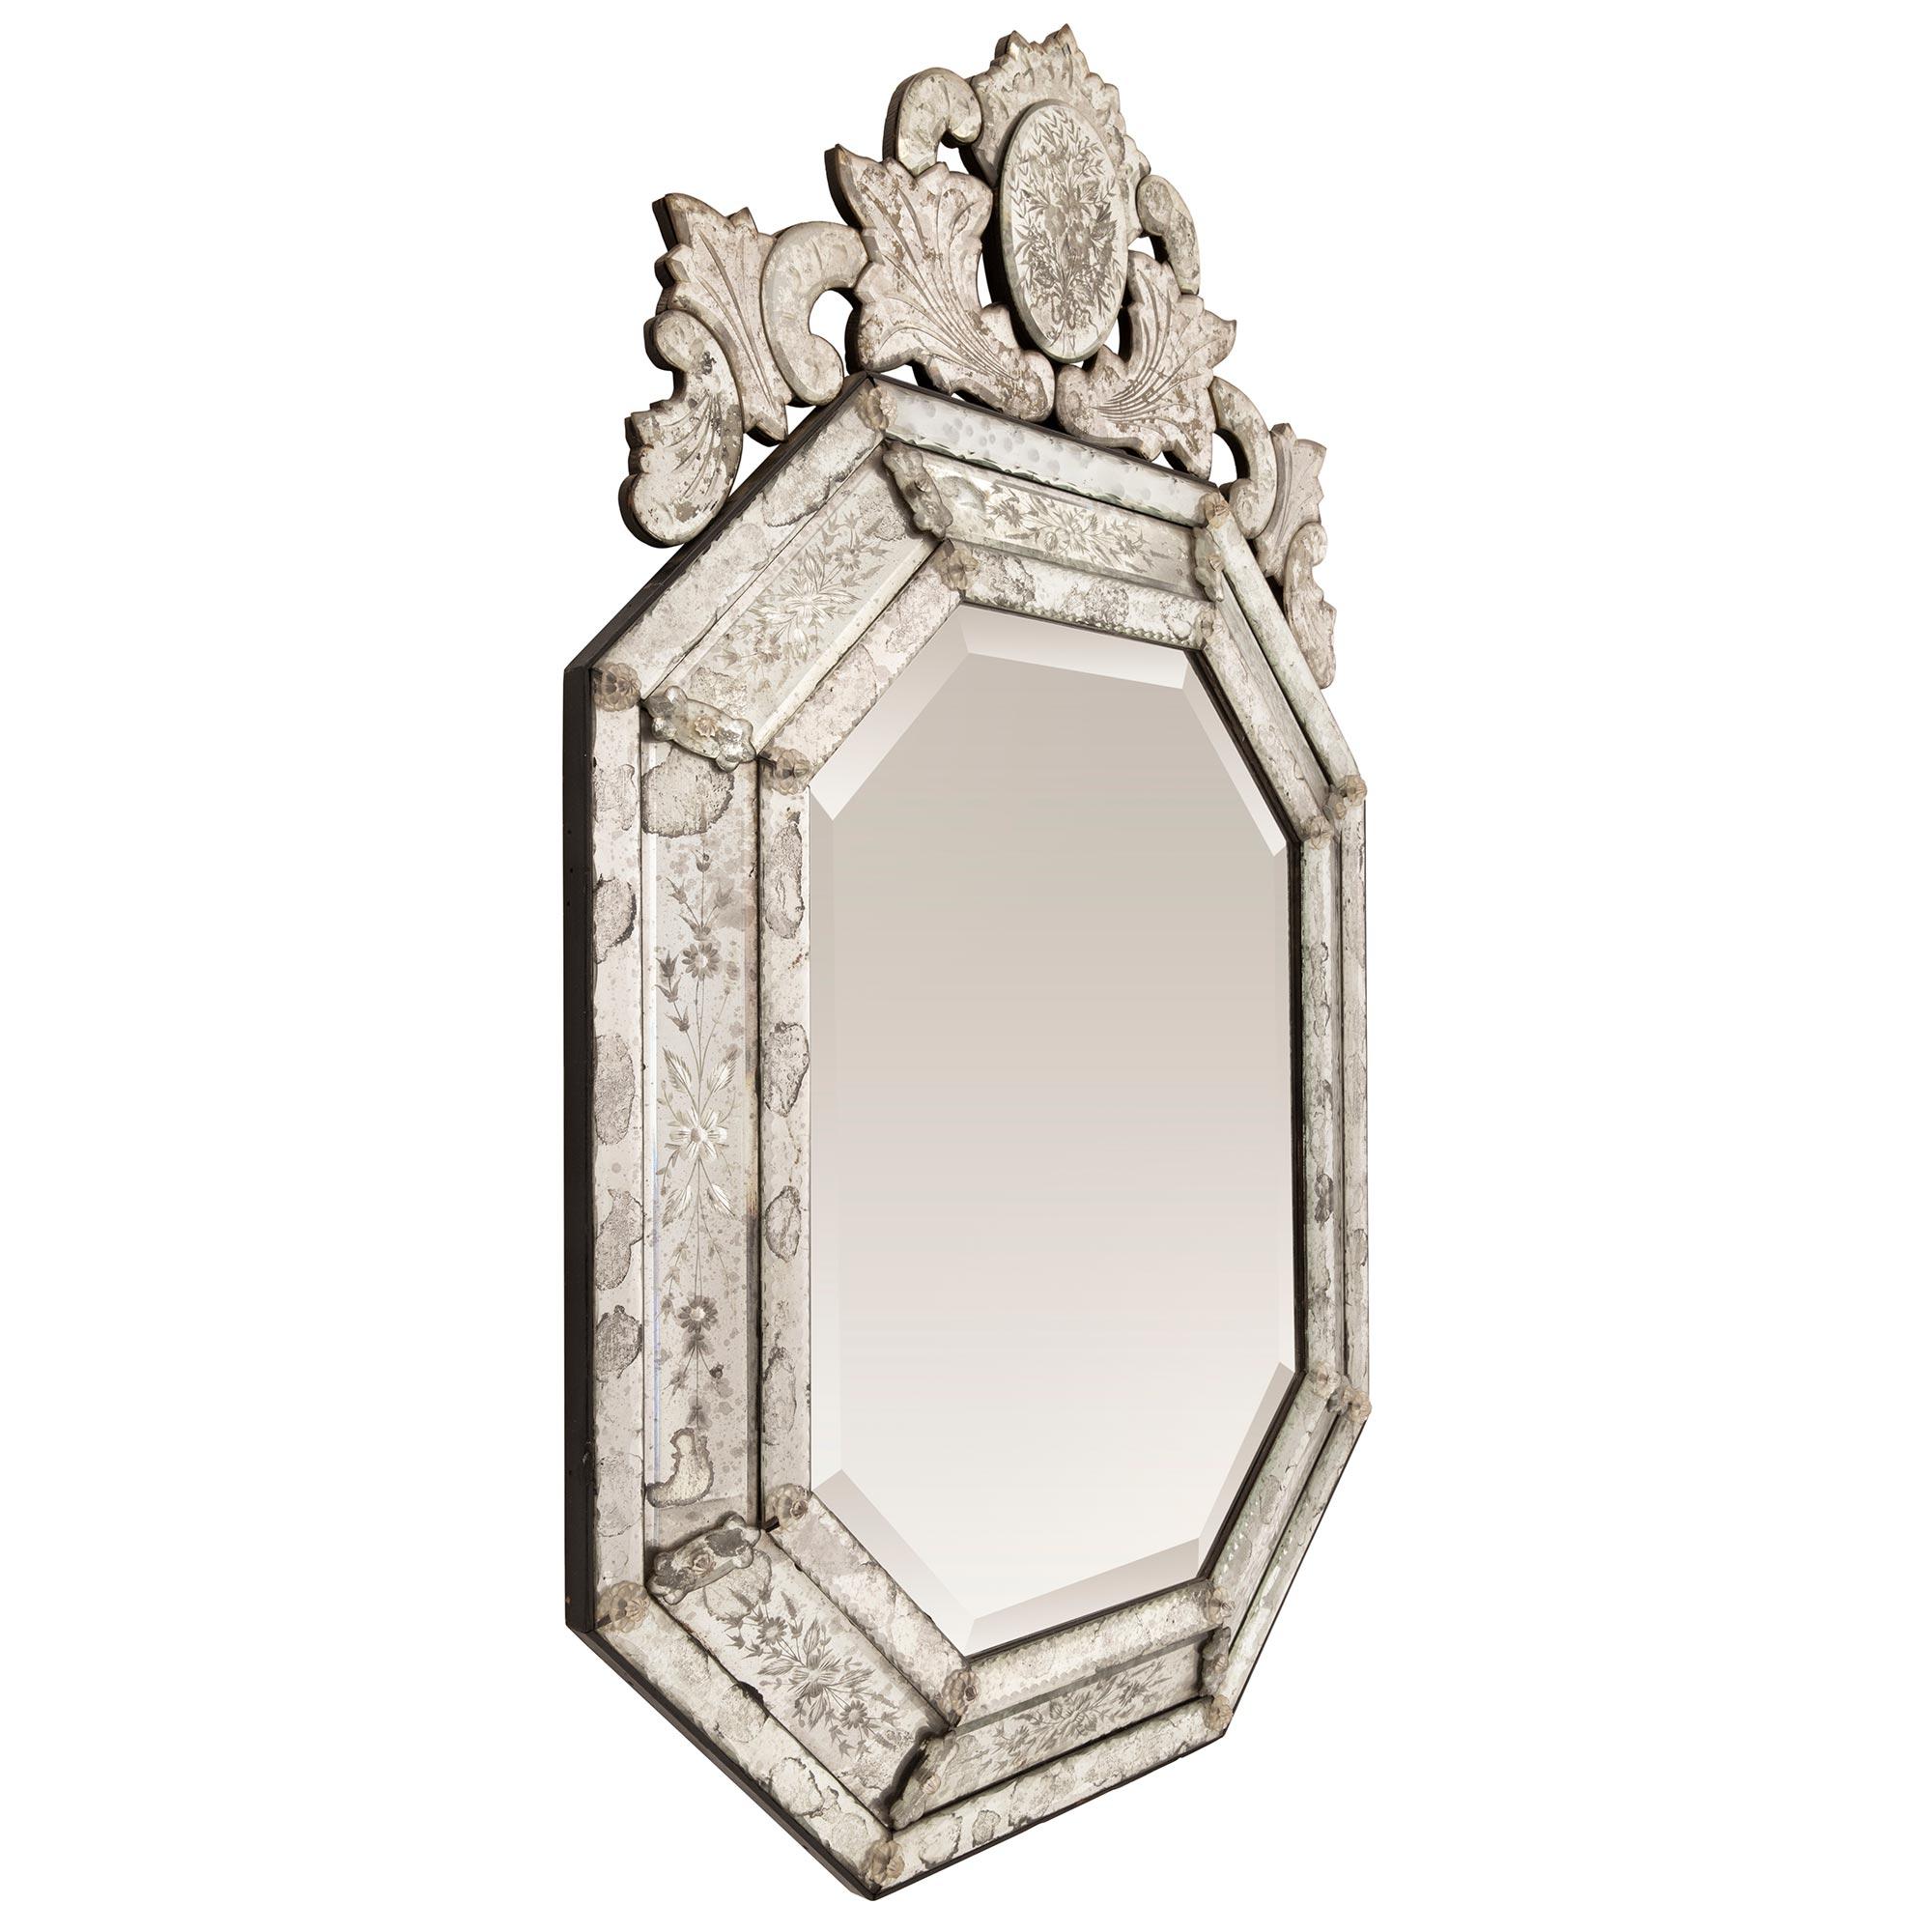 A striking and extremely decorative Italian 19th century Venetian st. octagonal shaped mirror. The beautiful mirror retains all of its original mirror plates throughout with the central one displaying an elegant bevel. Wrapping around the edge are